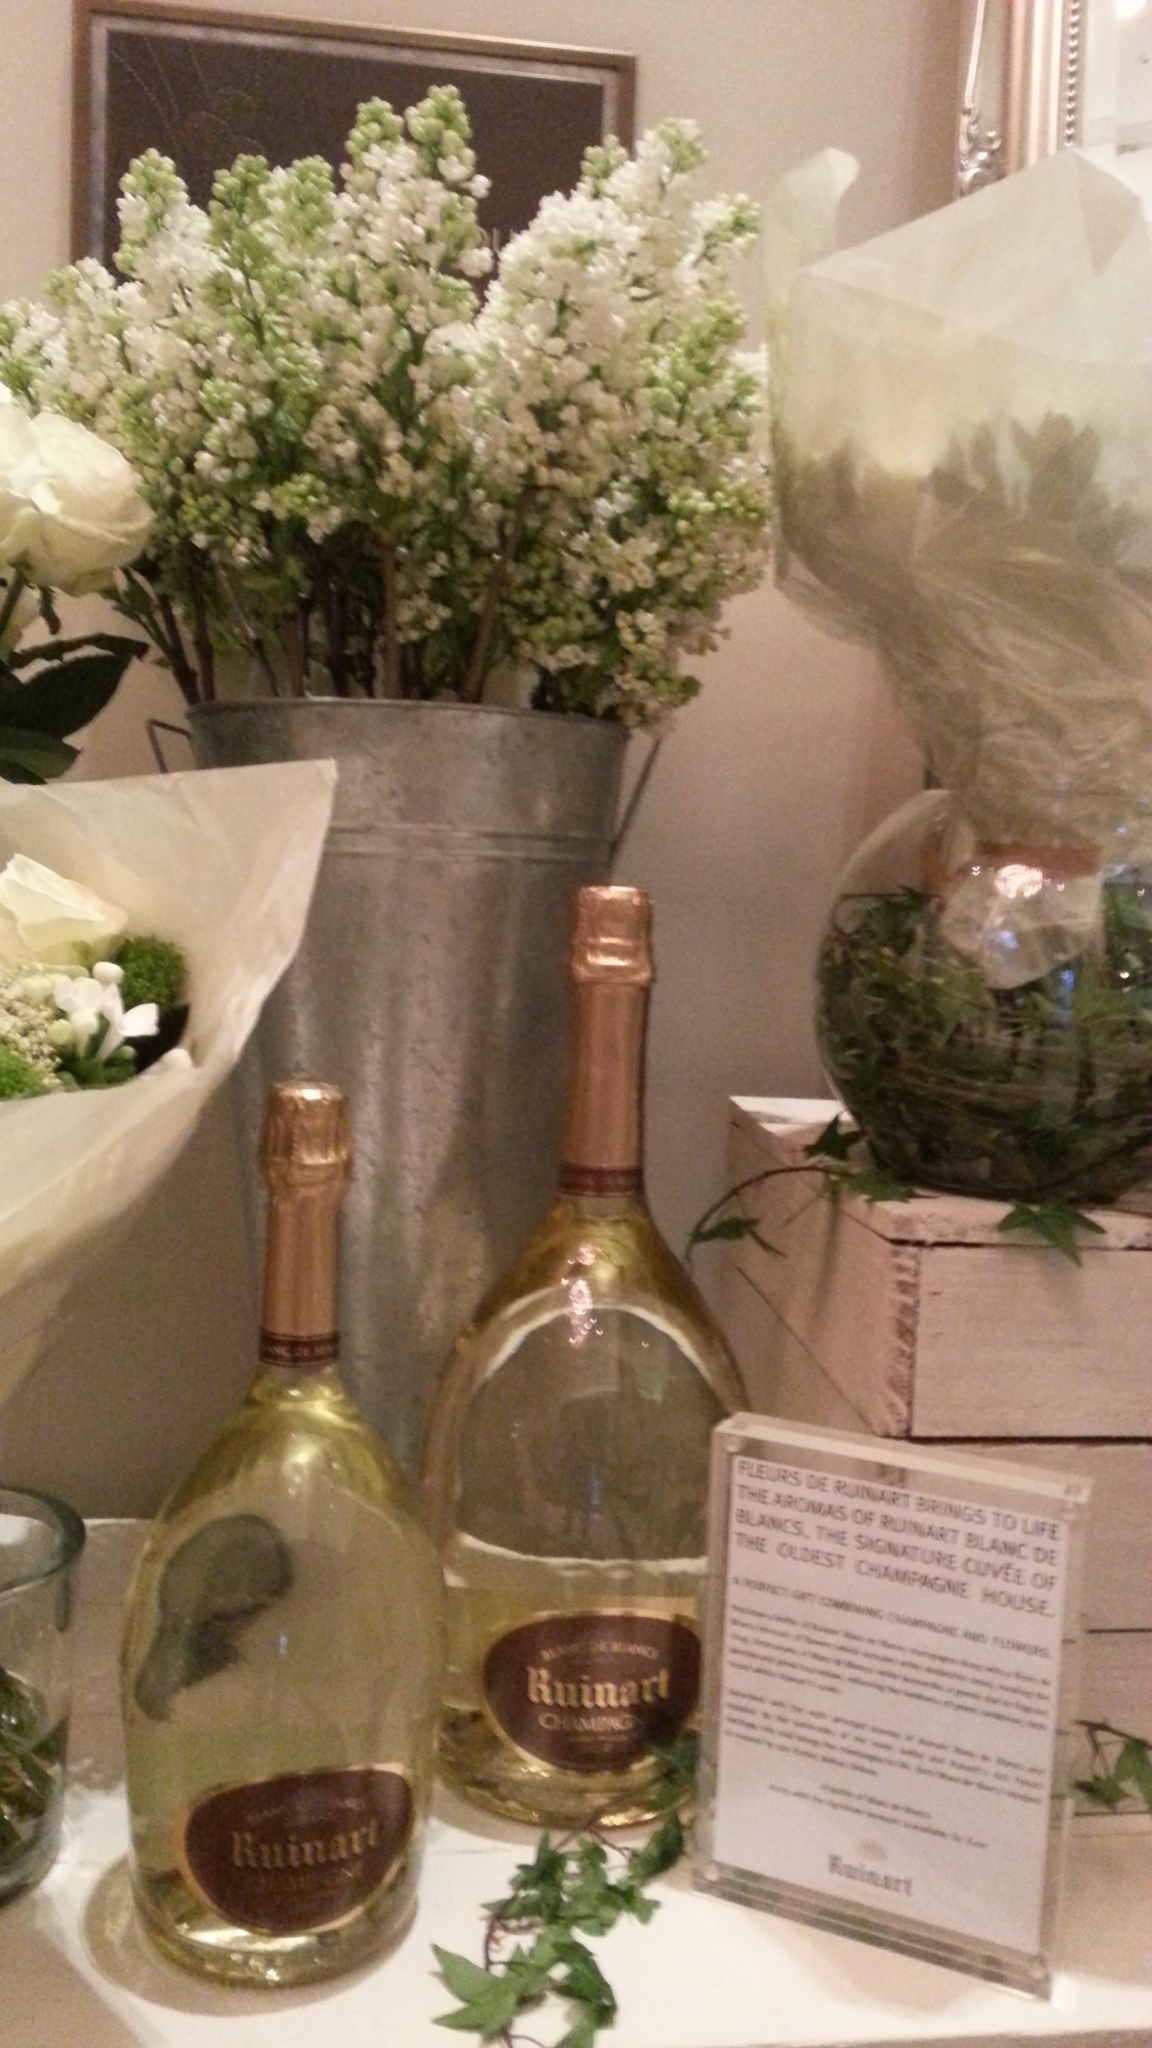 Fleurs de Ruinart with Ruinart champagne at the Langham Hotel